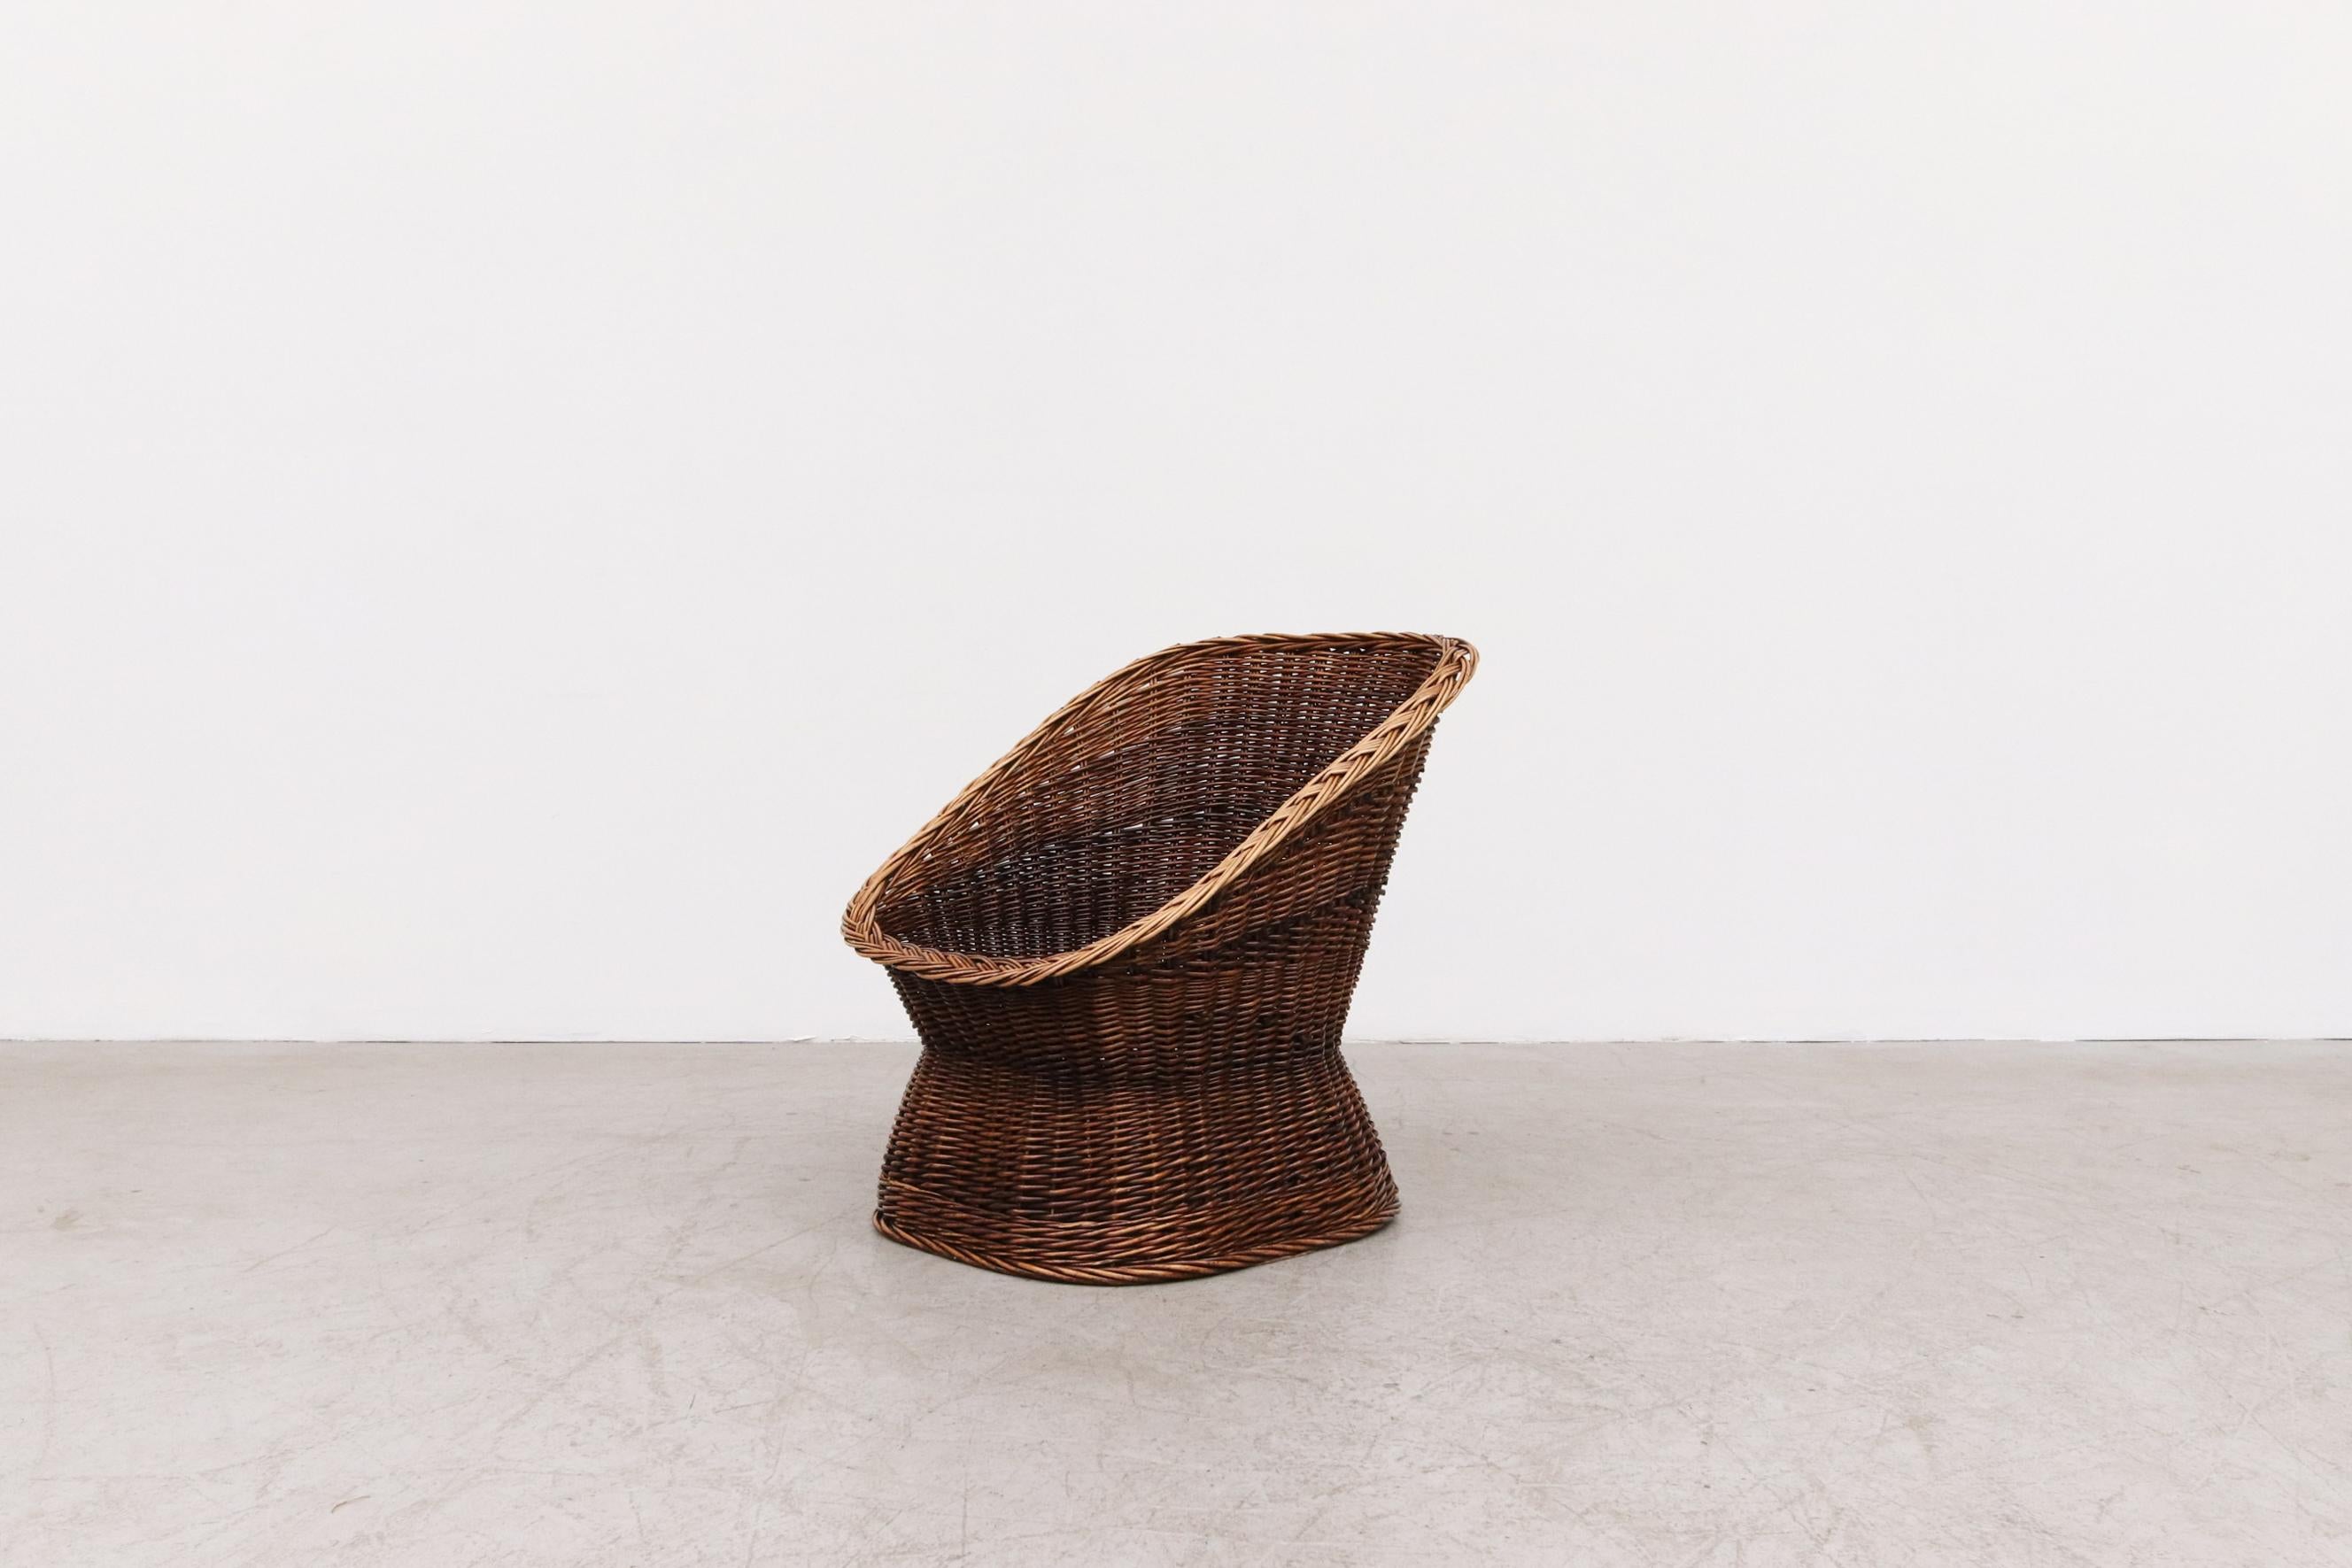 1970s Rattan Bucket Chair w/ Canvas Cushion, Square Shaped Body & Pedestal Base  For Sale 11